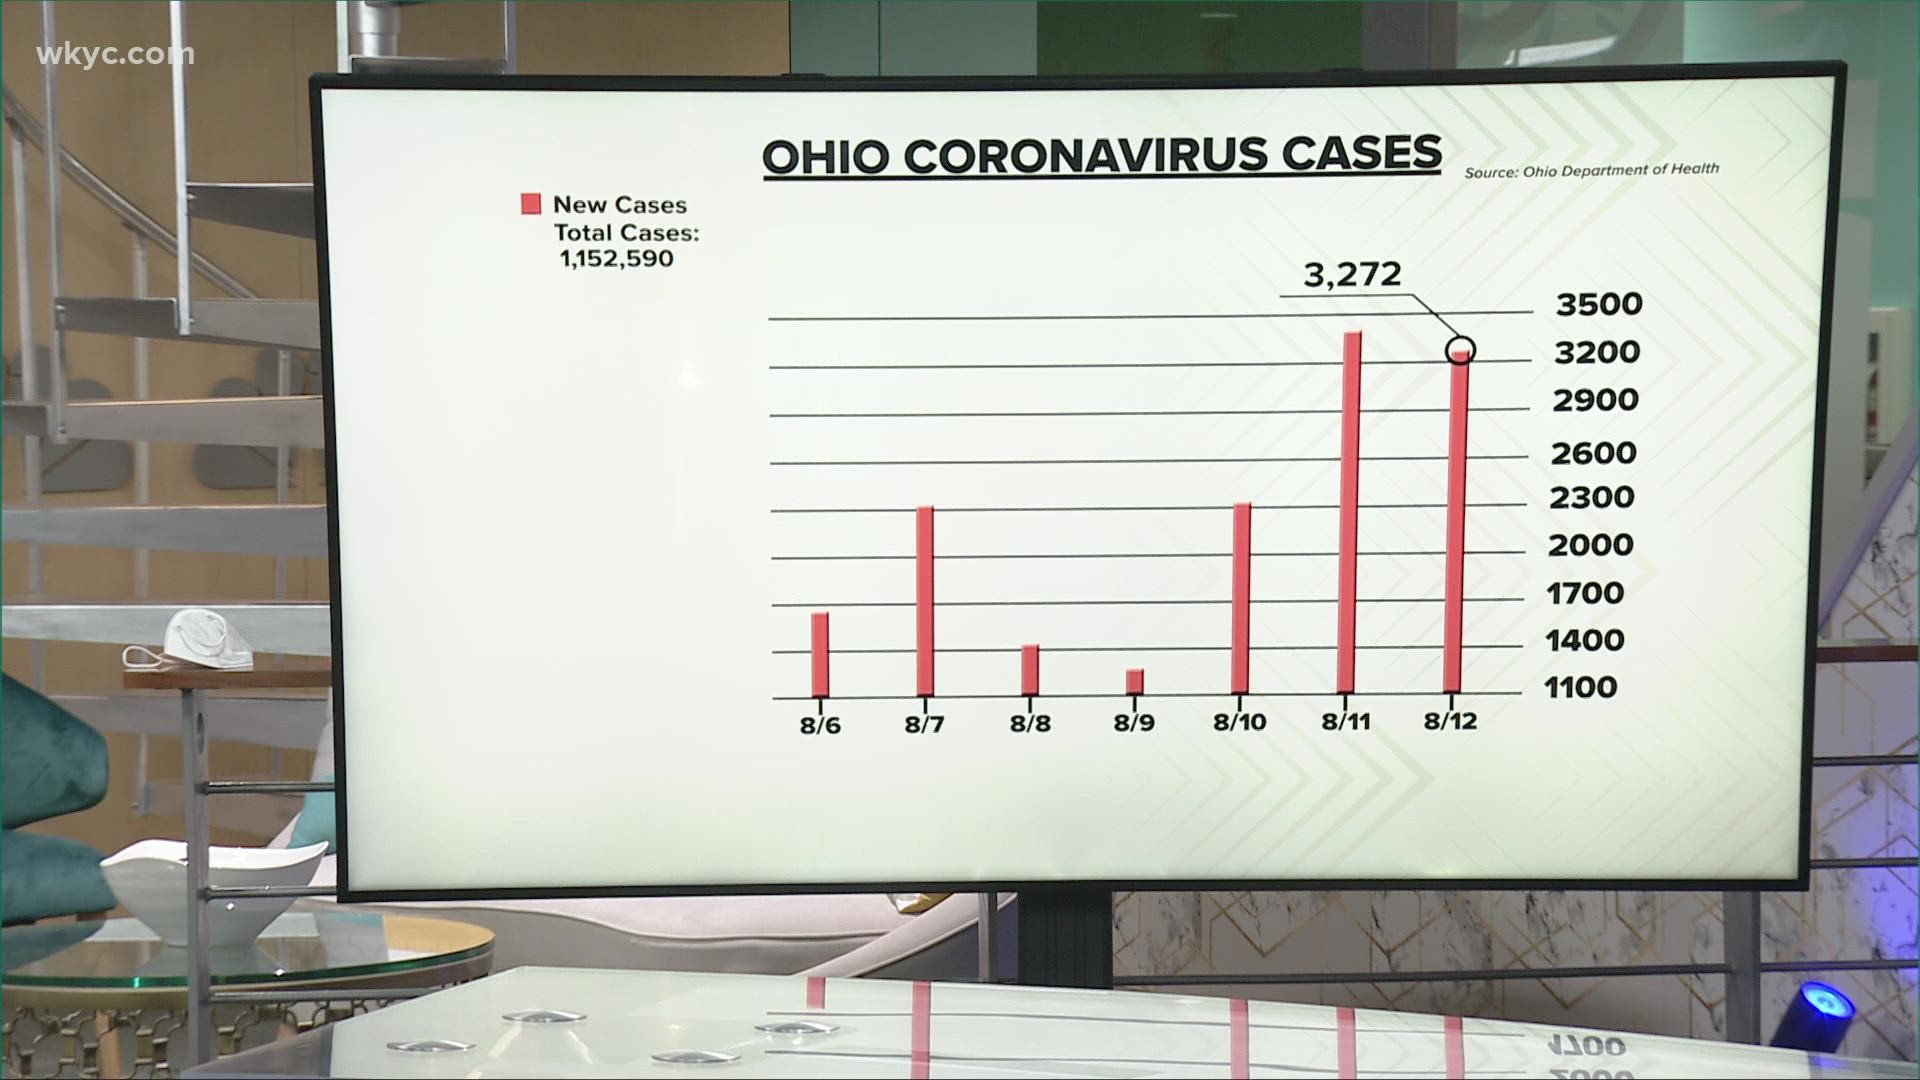 The state of Ohio reports 3,272 new cases of COVID-19 in the last 24 hours.